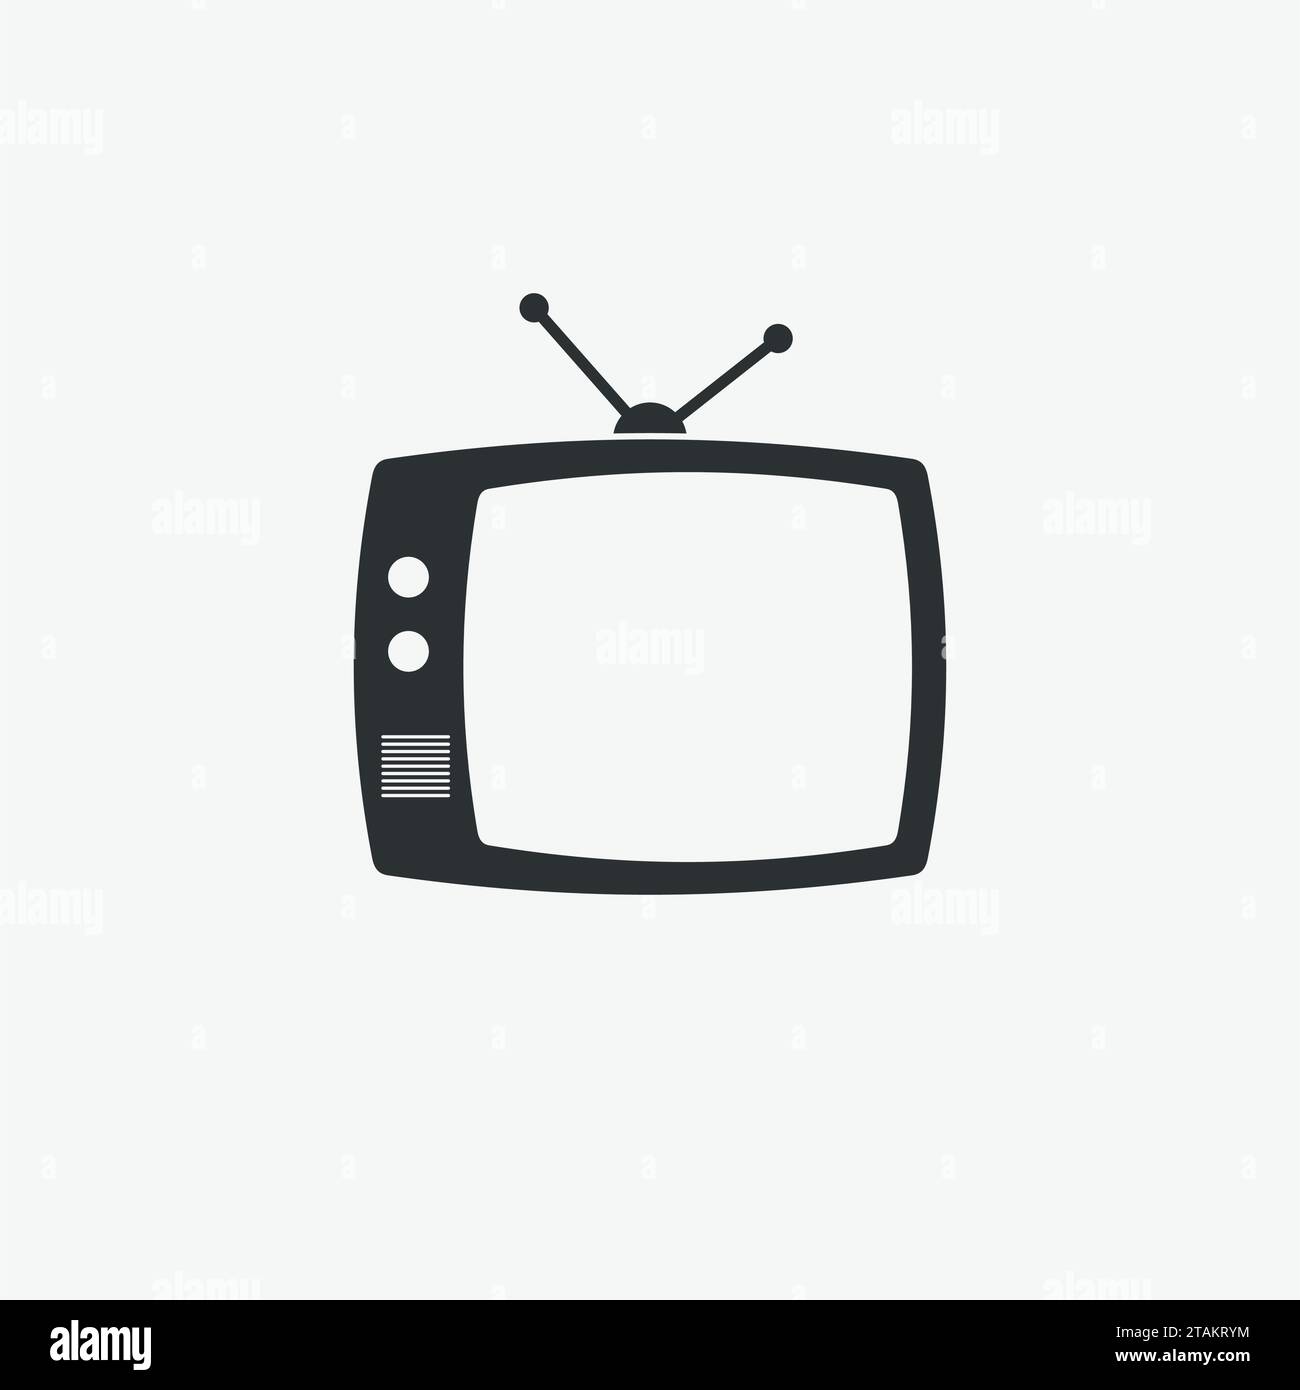 TV icon isolated on grey background. TV icon flat style. Black TV icon vector illustration Stock Vector